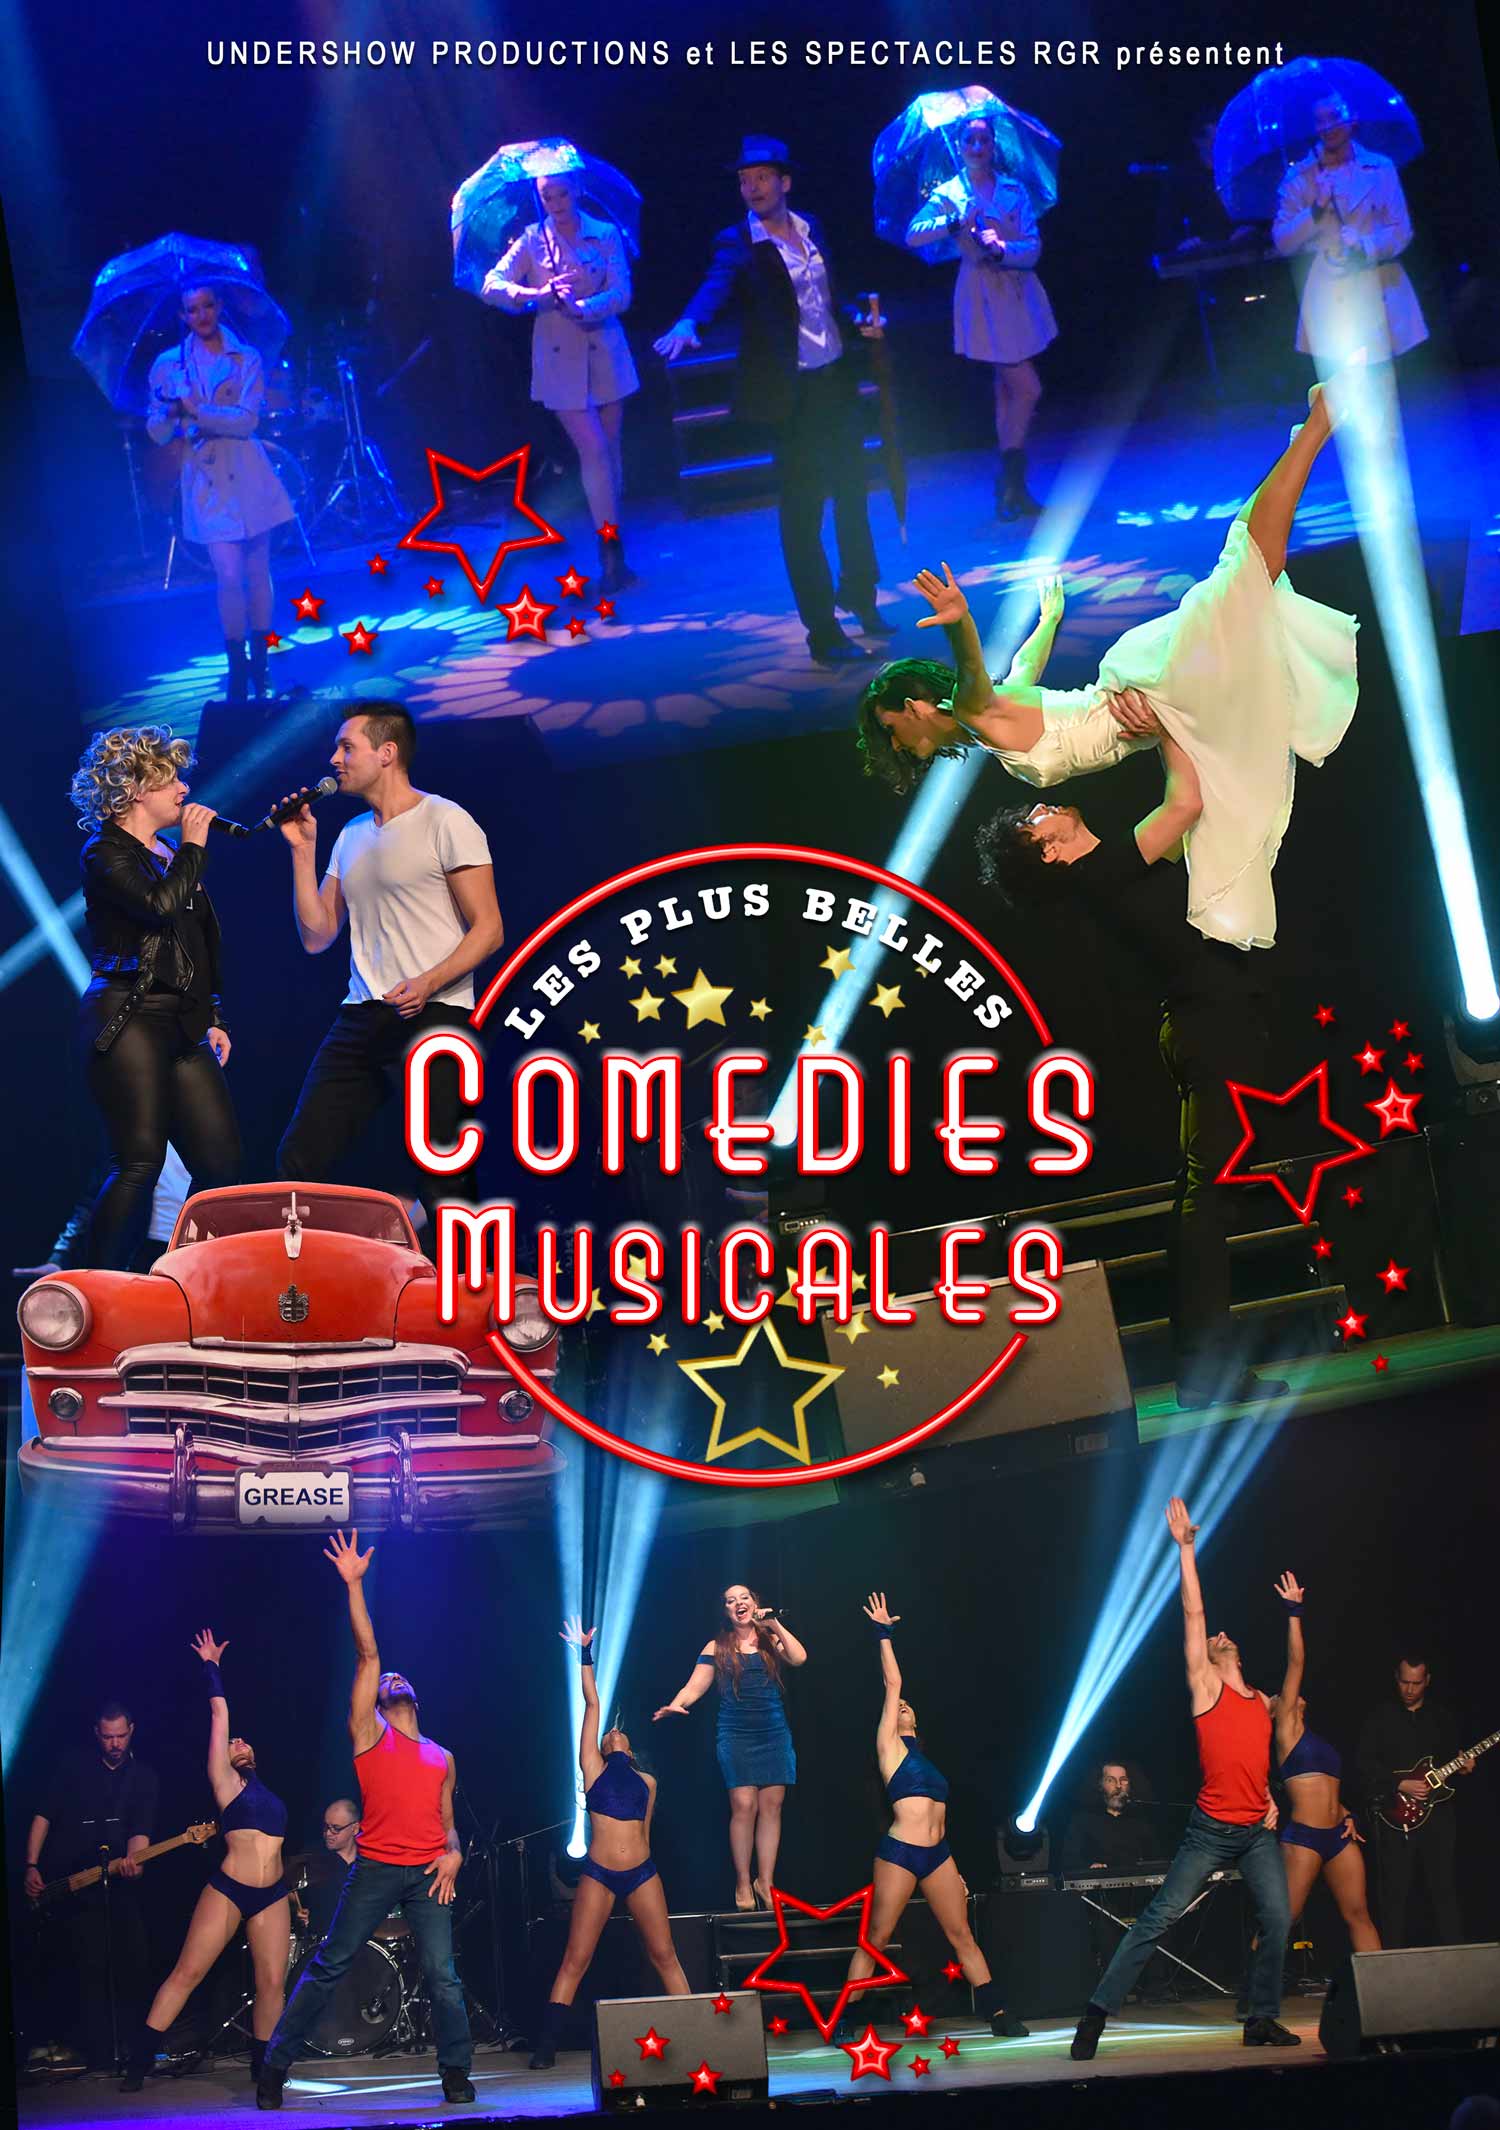 web-affiche-comedies-musicales